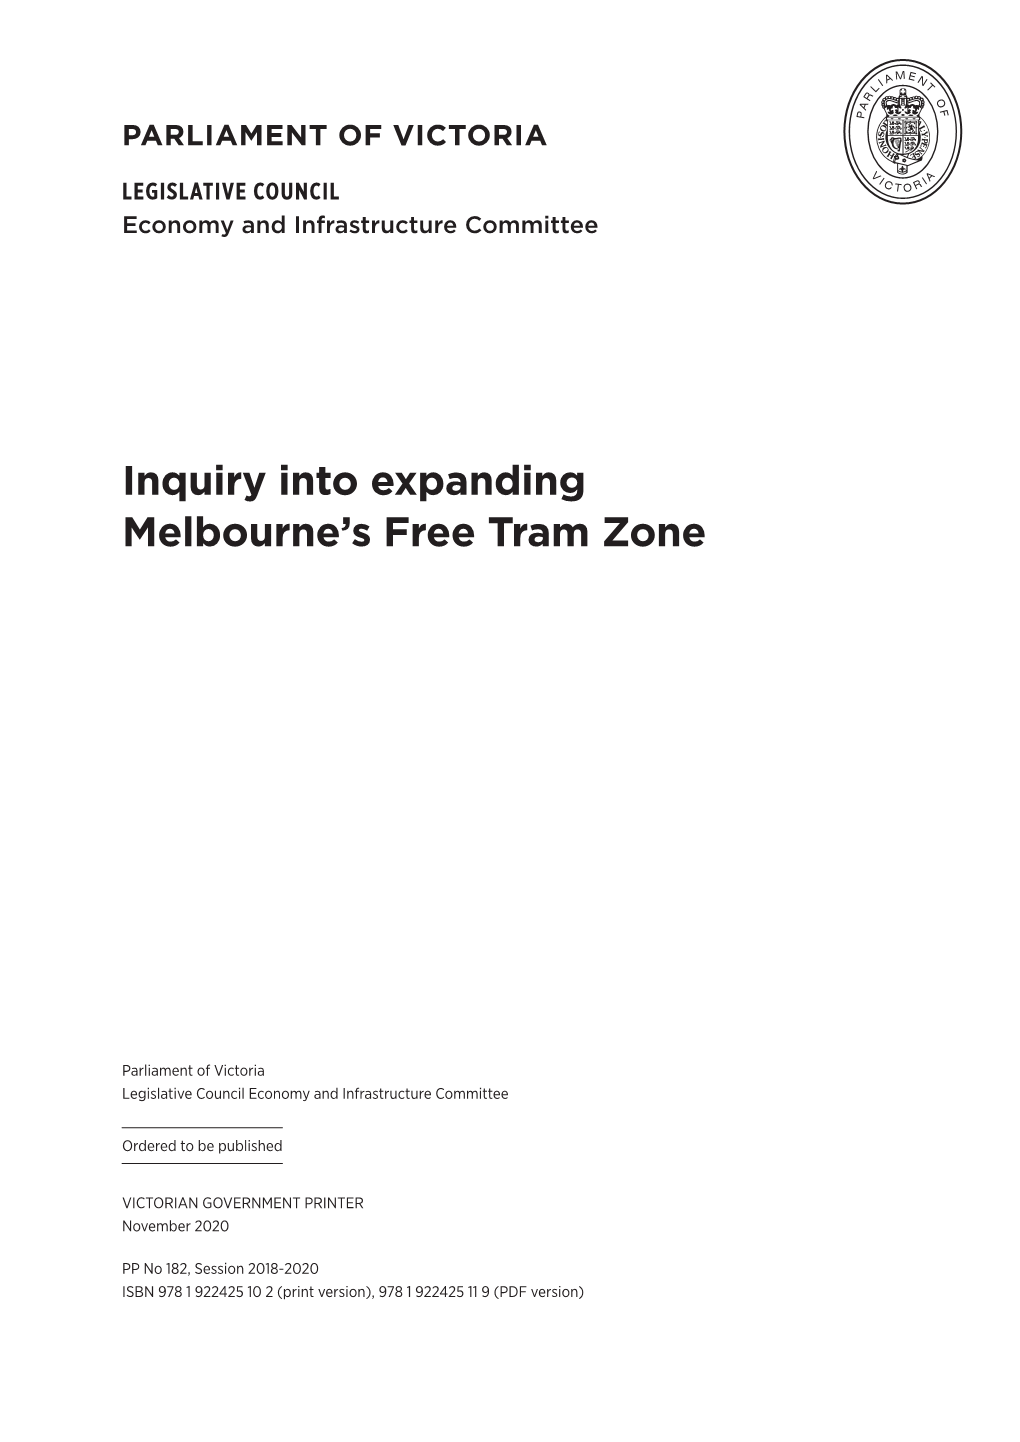 Inquiry Into Expanding Melbourne's Free Tram Zone